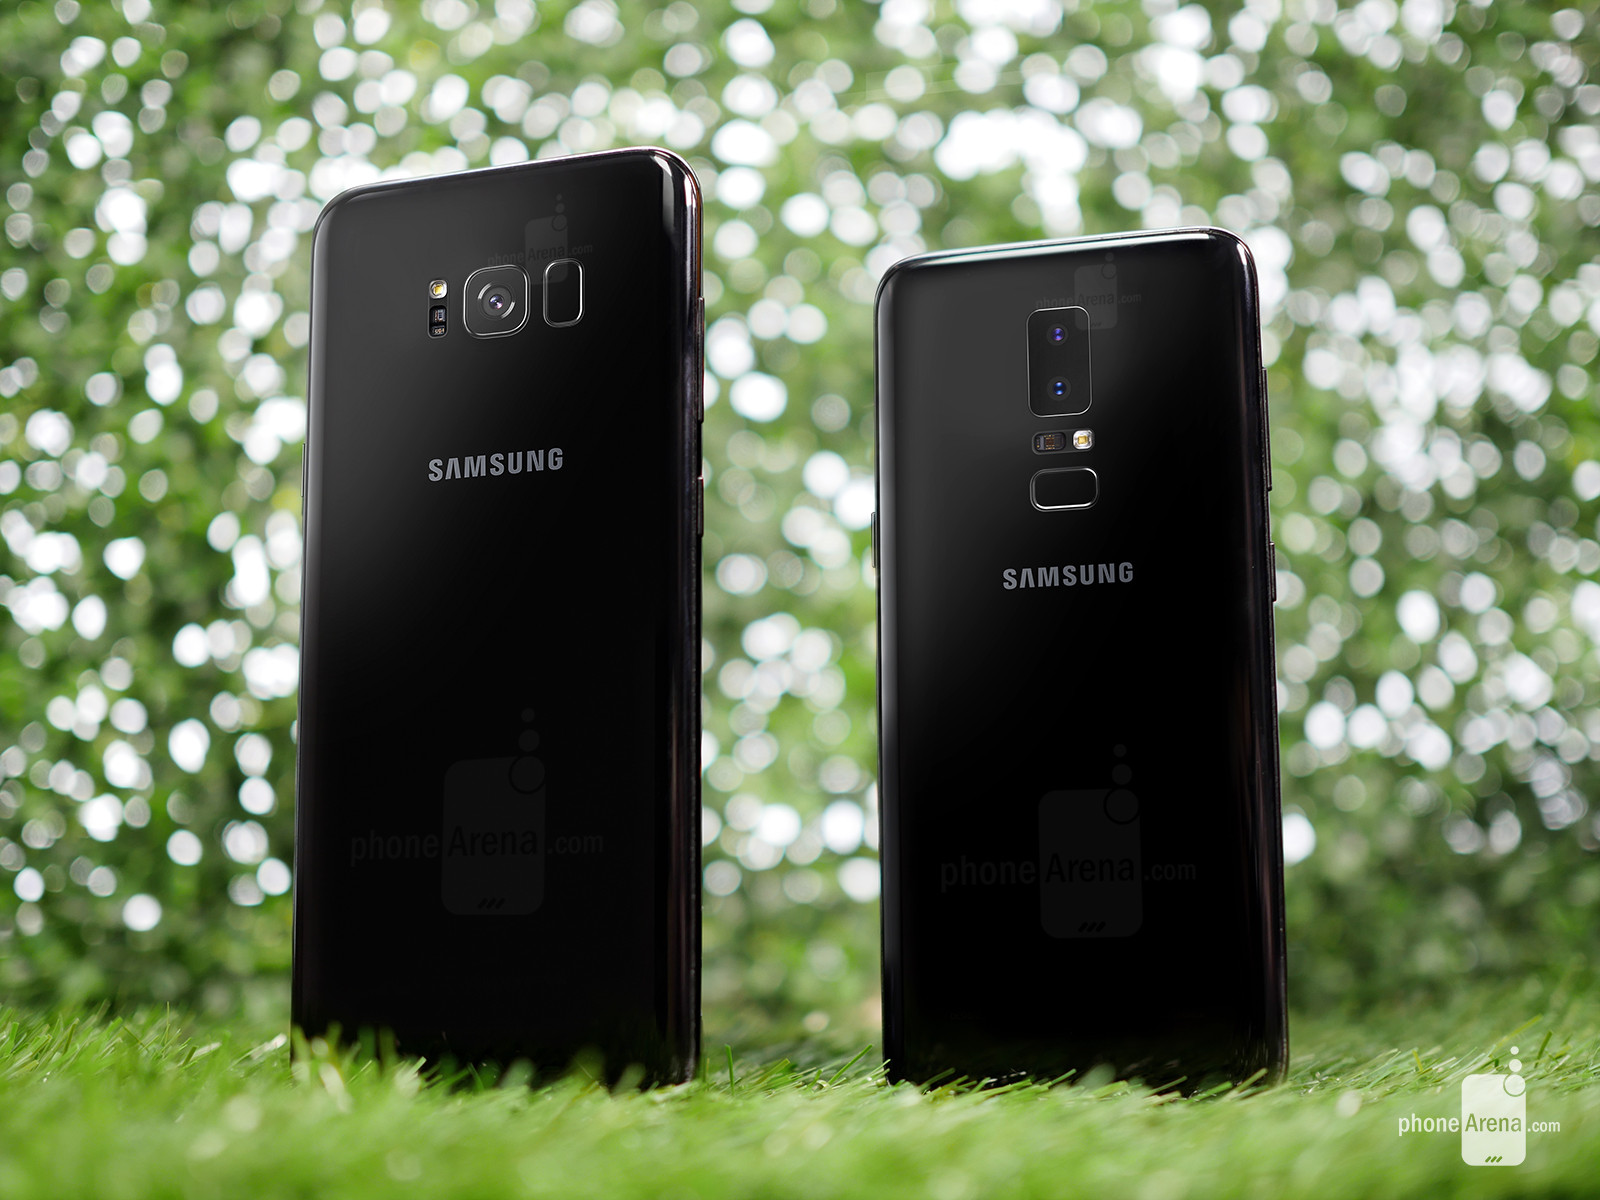 1511176357_galaxy-s8-left-next-to-a-galaxy-s9-concept-with-a-dual-camera-array-and-centered-rear-mounted-fingerprint-scanner.jpg